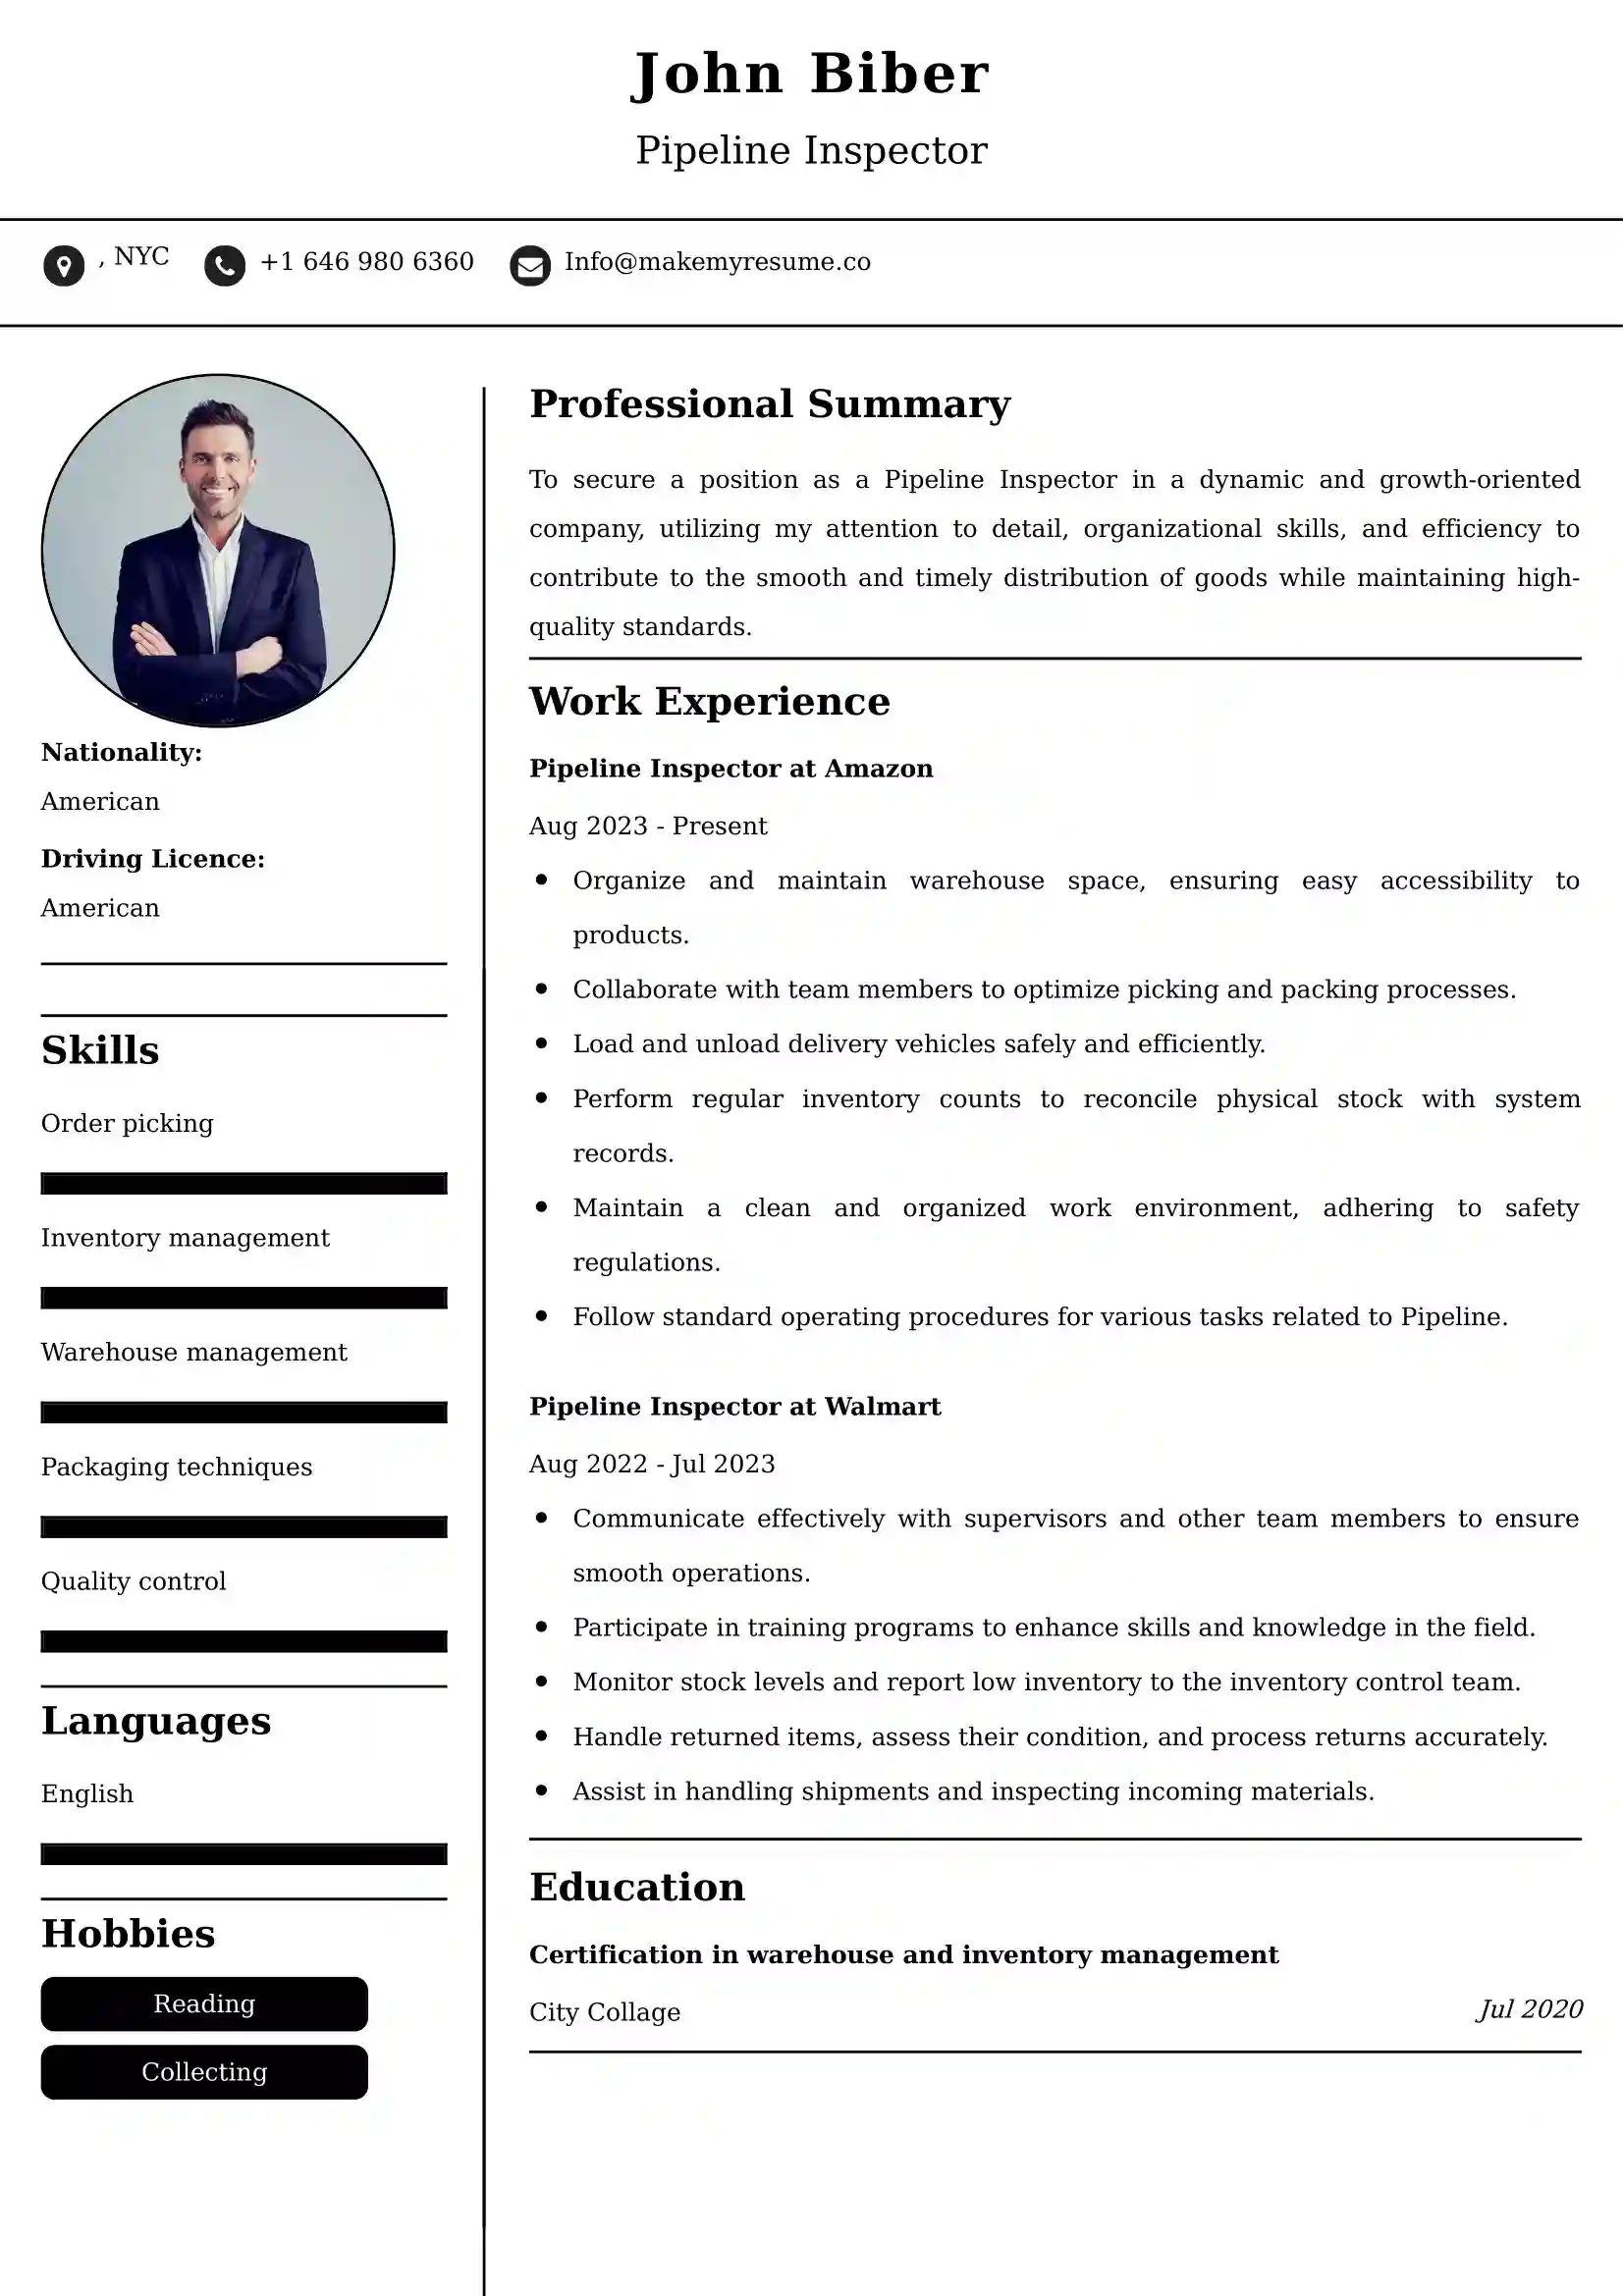 Pipeline Inspector Resume Examples - UK Format, Latest Template.